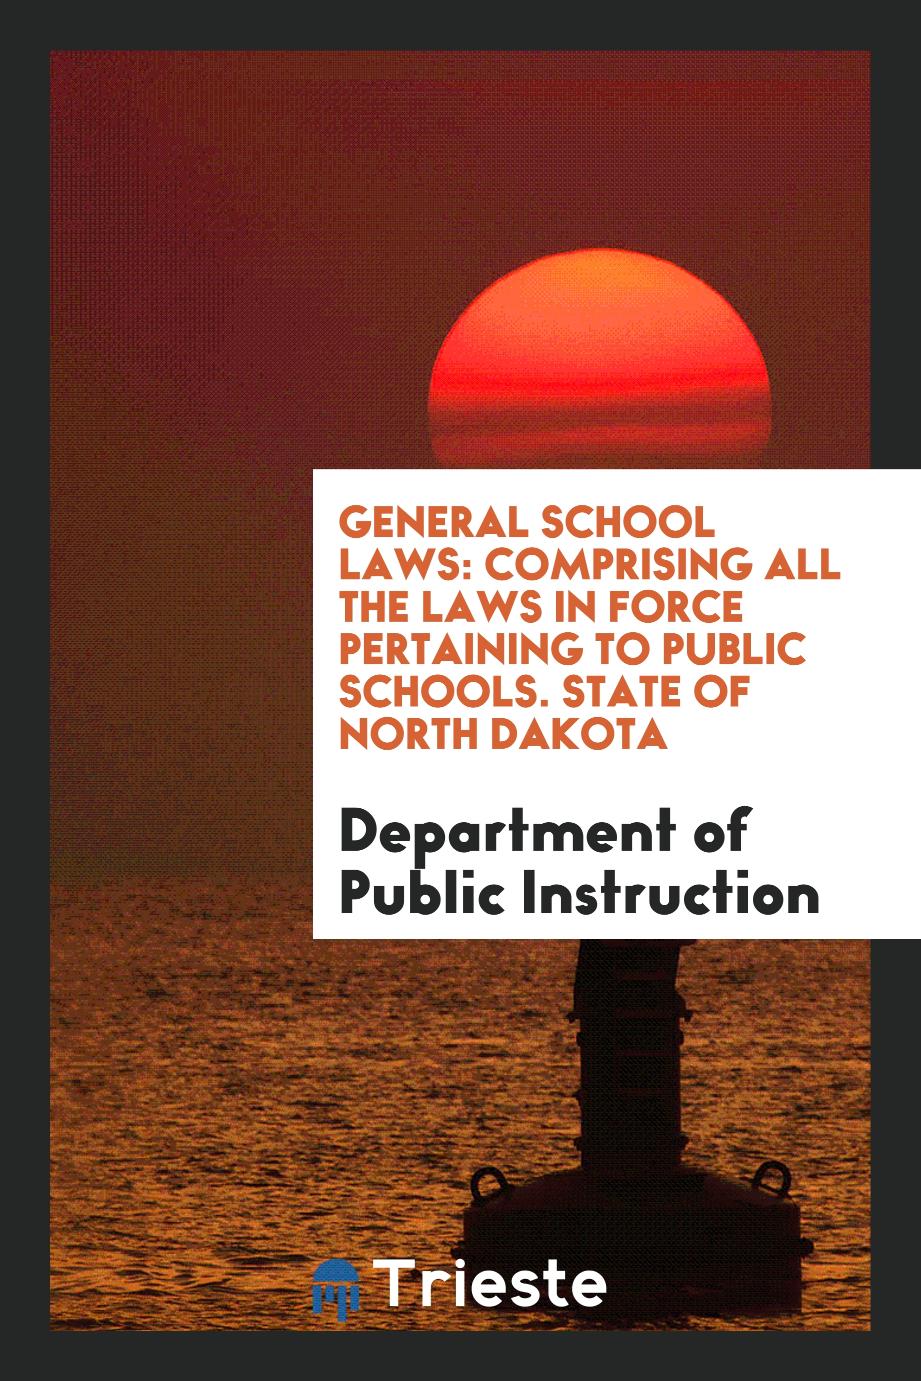 General School Laws: Comprising All the Laws in Force Pertaining to Public Schools. State of North Dakota